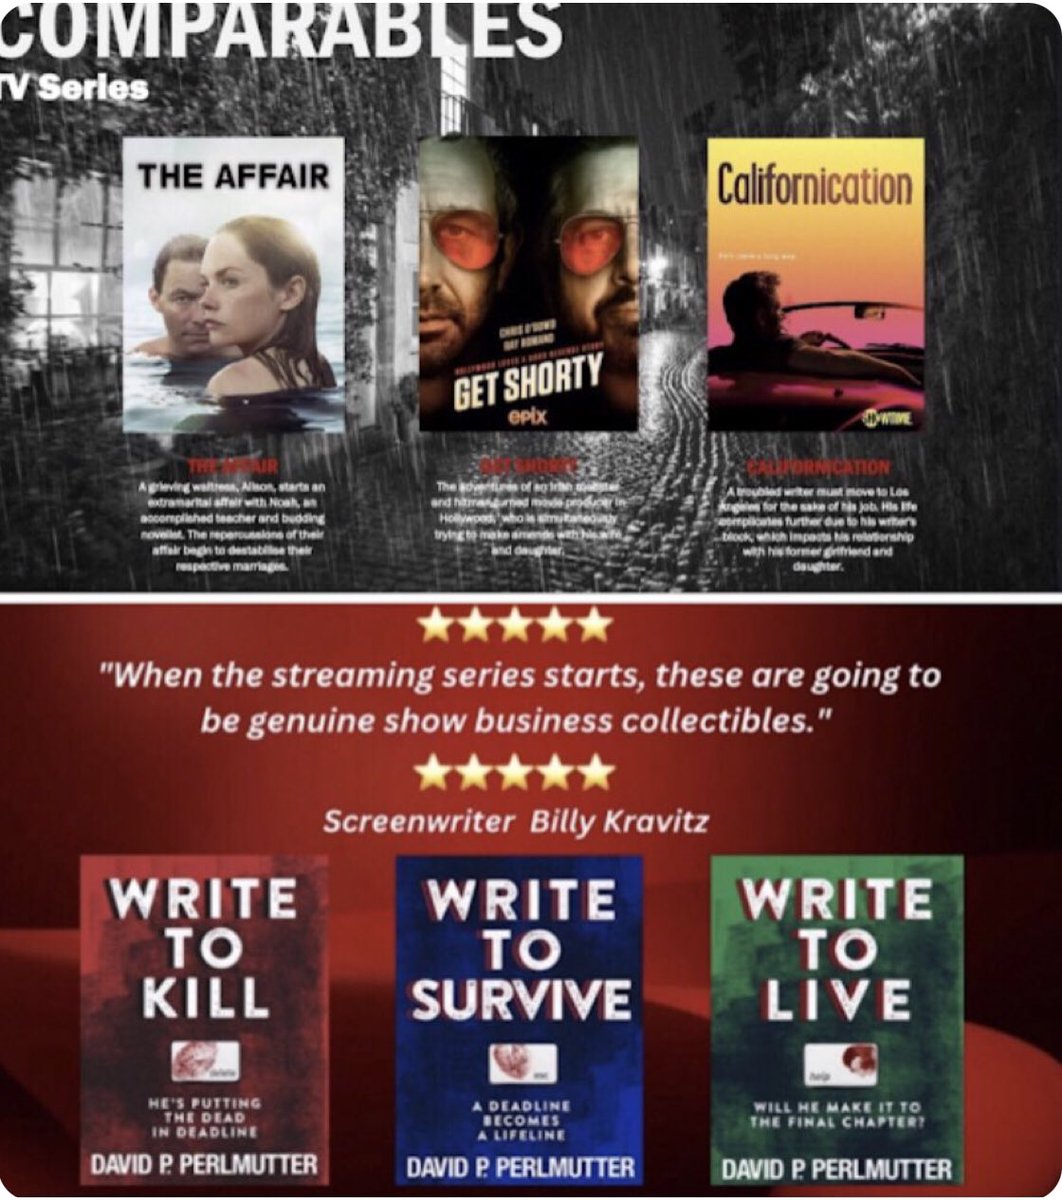 @IsratJahanRipaa Previously on #WriteToKill….. 🔪🩸 Can you imagine @kat_films seeing that on @netflix @ParamountUK @peacock @HBO @Showtime @AppleTV @ABC @nbc @ITV @alibi_channel @STARZ @StreamOnMax @channel5_tv @BBCOne @Channel4 ✍🏼🎬 TV Comparable: @SHO_TheAffair @getshorty @SHO_Cali 📺 OVER…